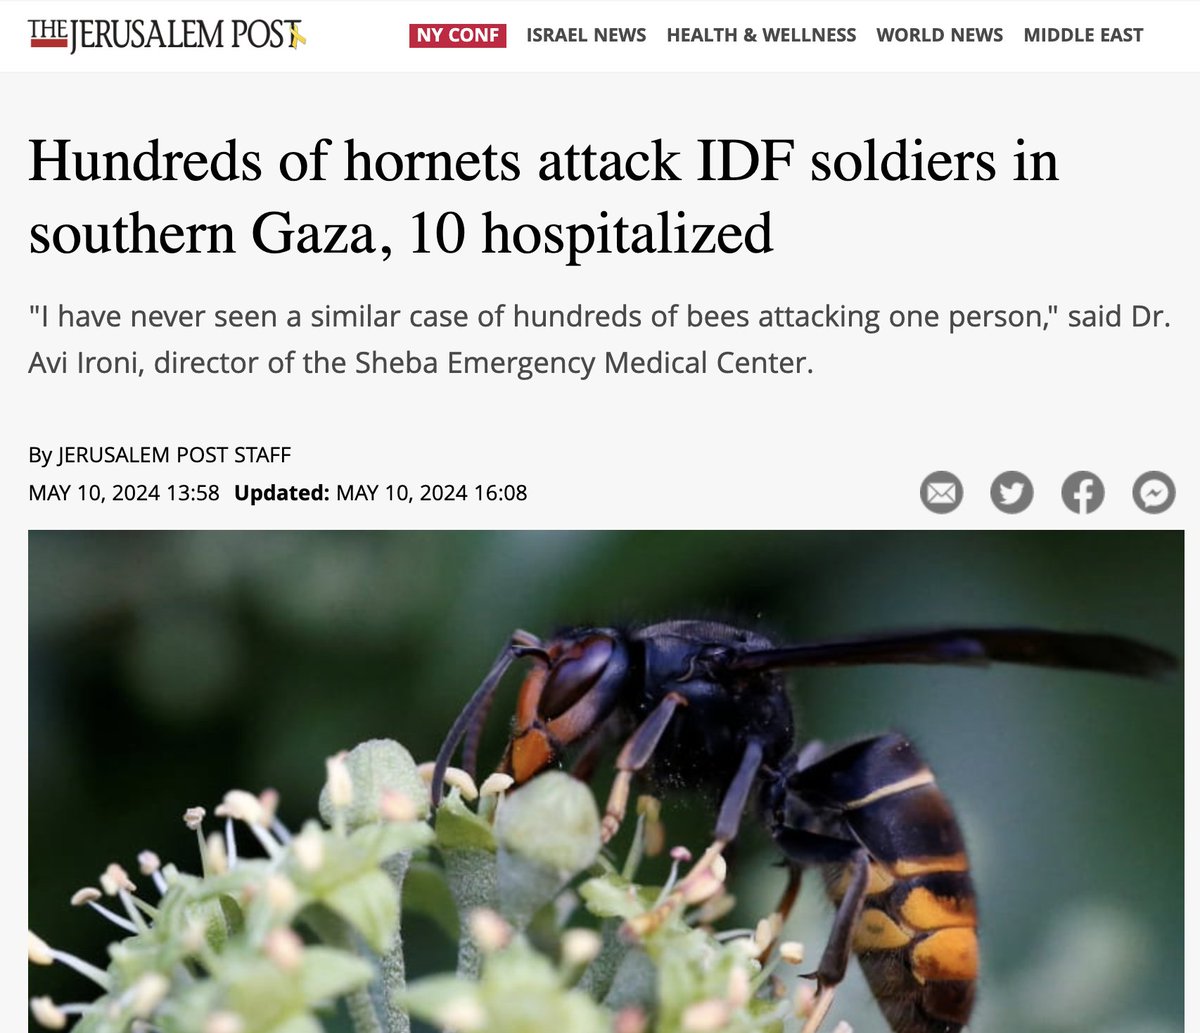 'Soldiers had been attacked by wild dogs in the early stages of the invasion, leading to a mass cull of dogs in the Gaza Strip to prevent the spread of disease and prevent the dogs from crossing into Israel and exposing Israeli dogs to rabies or other diseases.'